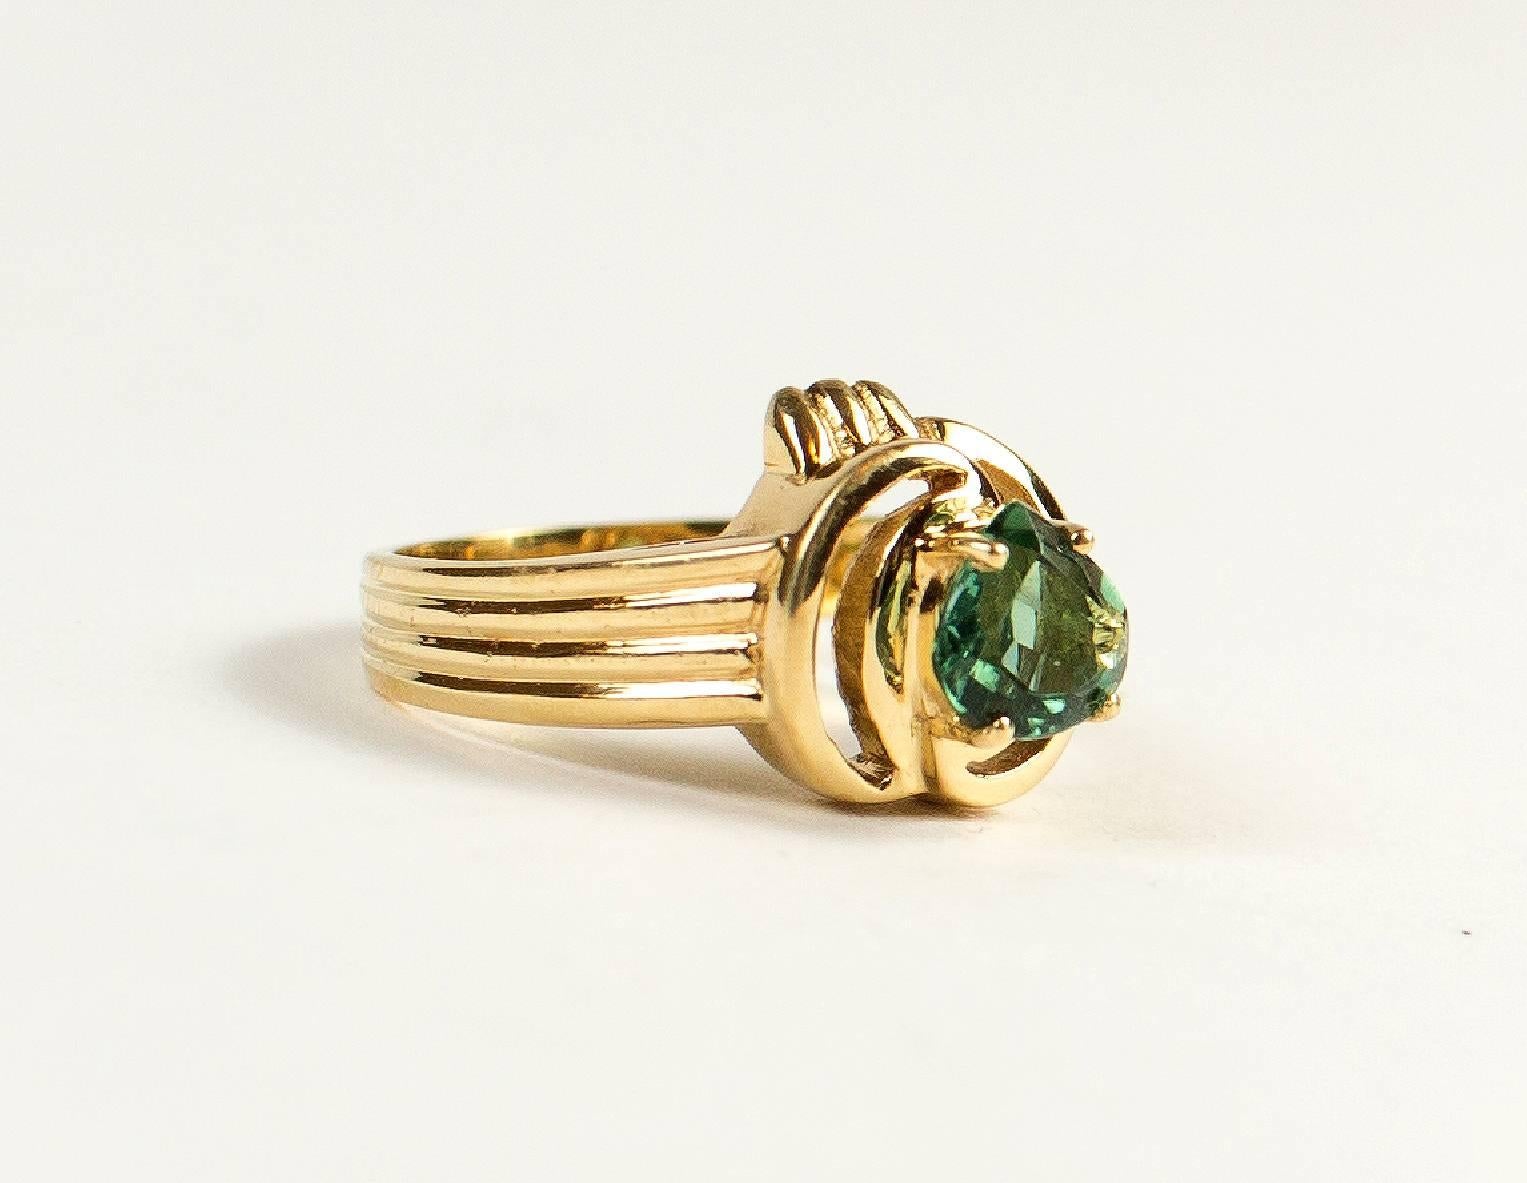   Lovely apple green very sparkly Brazilian fat pear shape tourmaline (approximately 6x5mm) set in a swirl of 18kt yellow gold.  This Brazilian handmade ring has a generous amount of 18kt yellow gold in a creative setting to enhance its wonderful